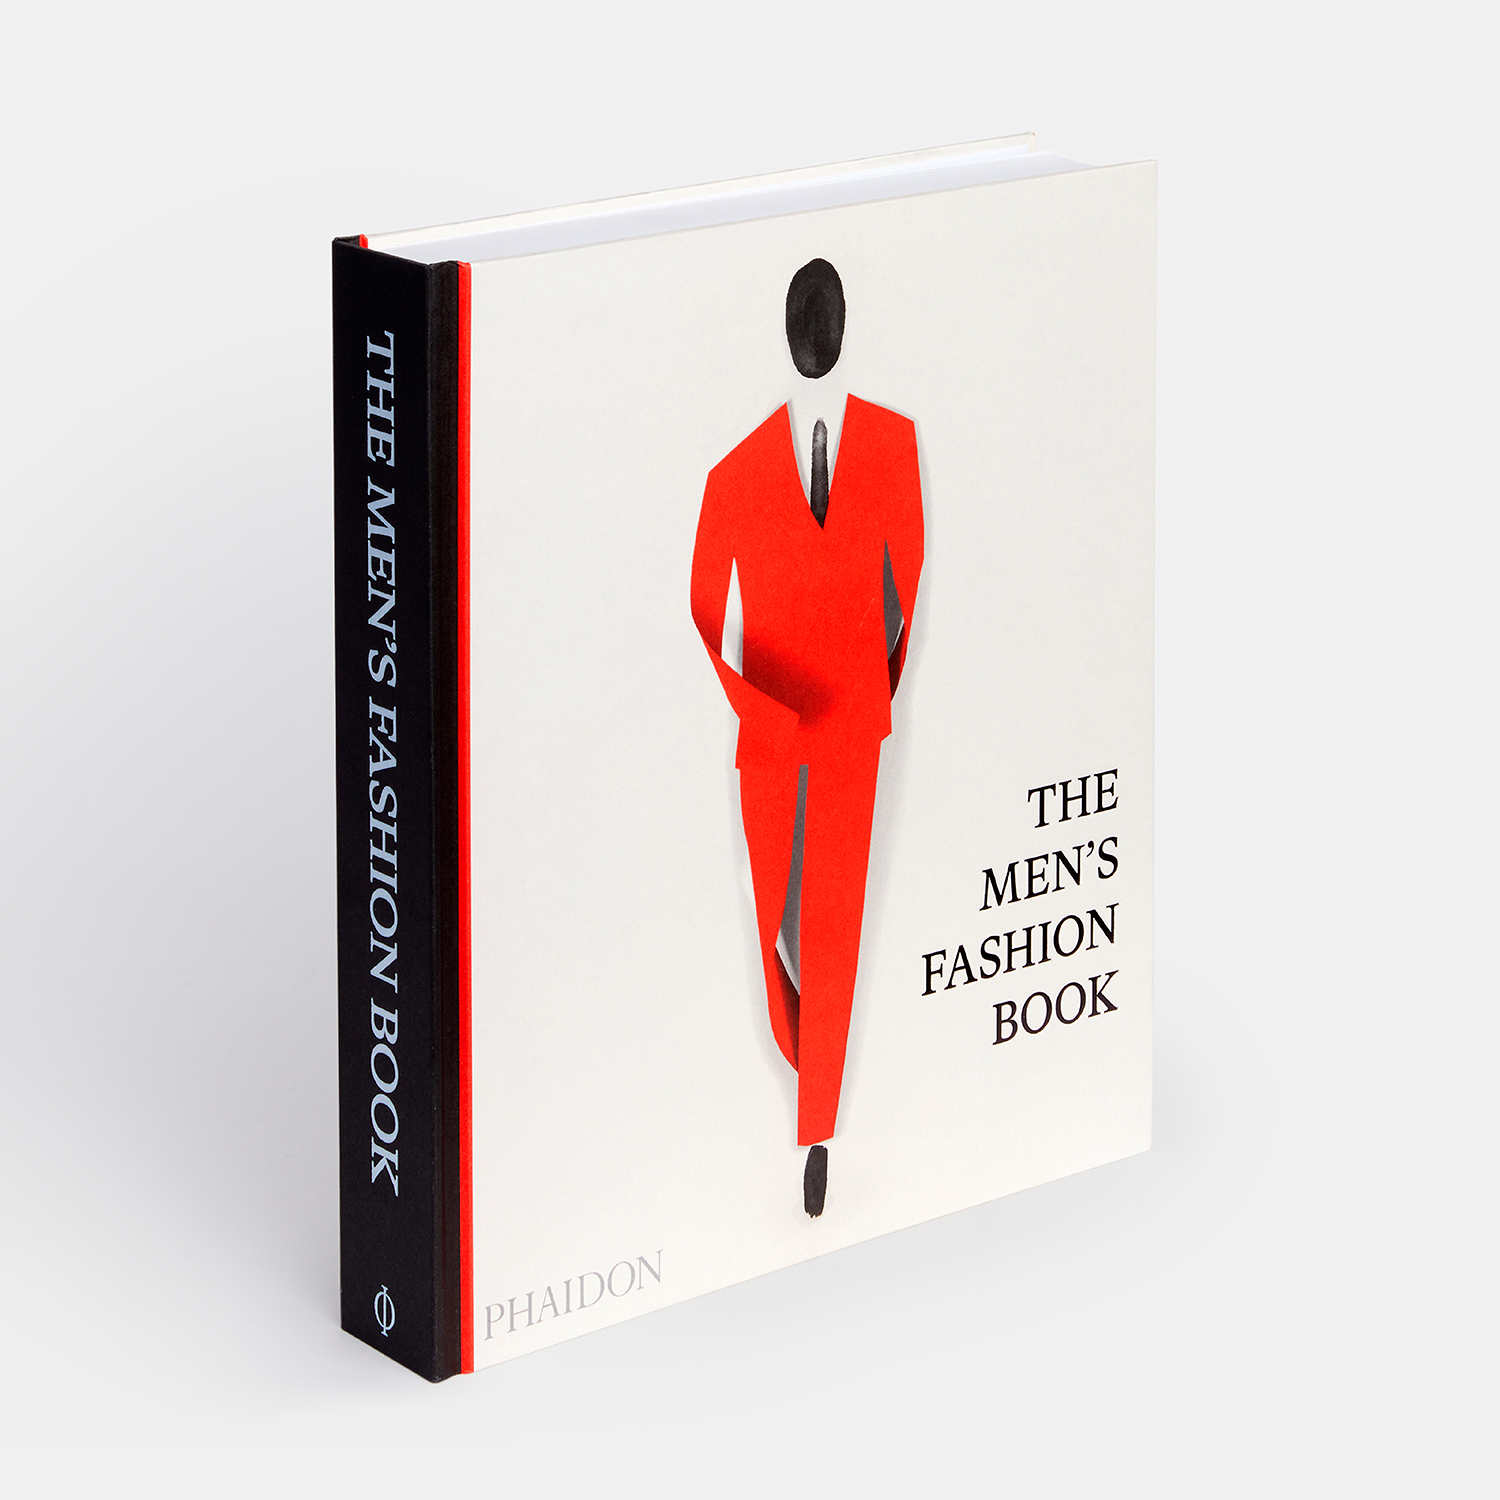 All you need to know about The Men’s Fashion Book